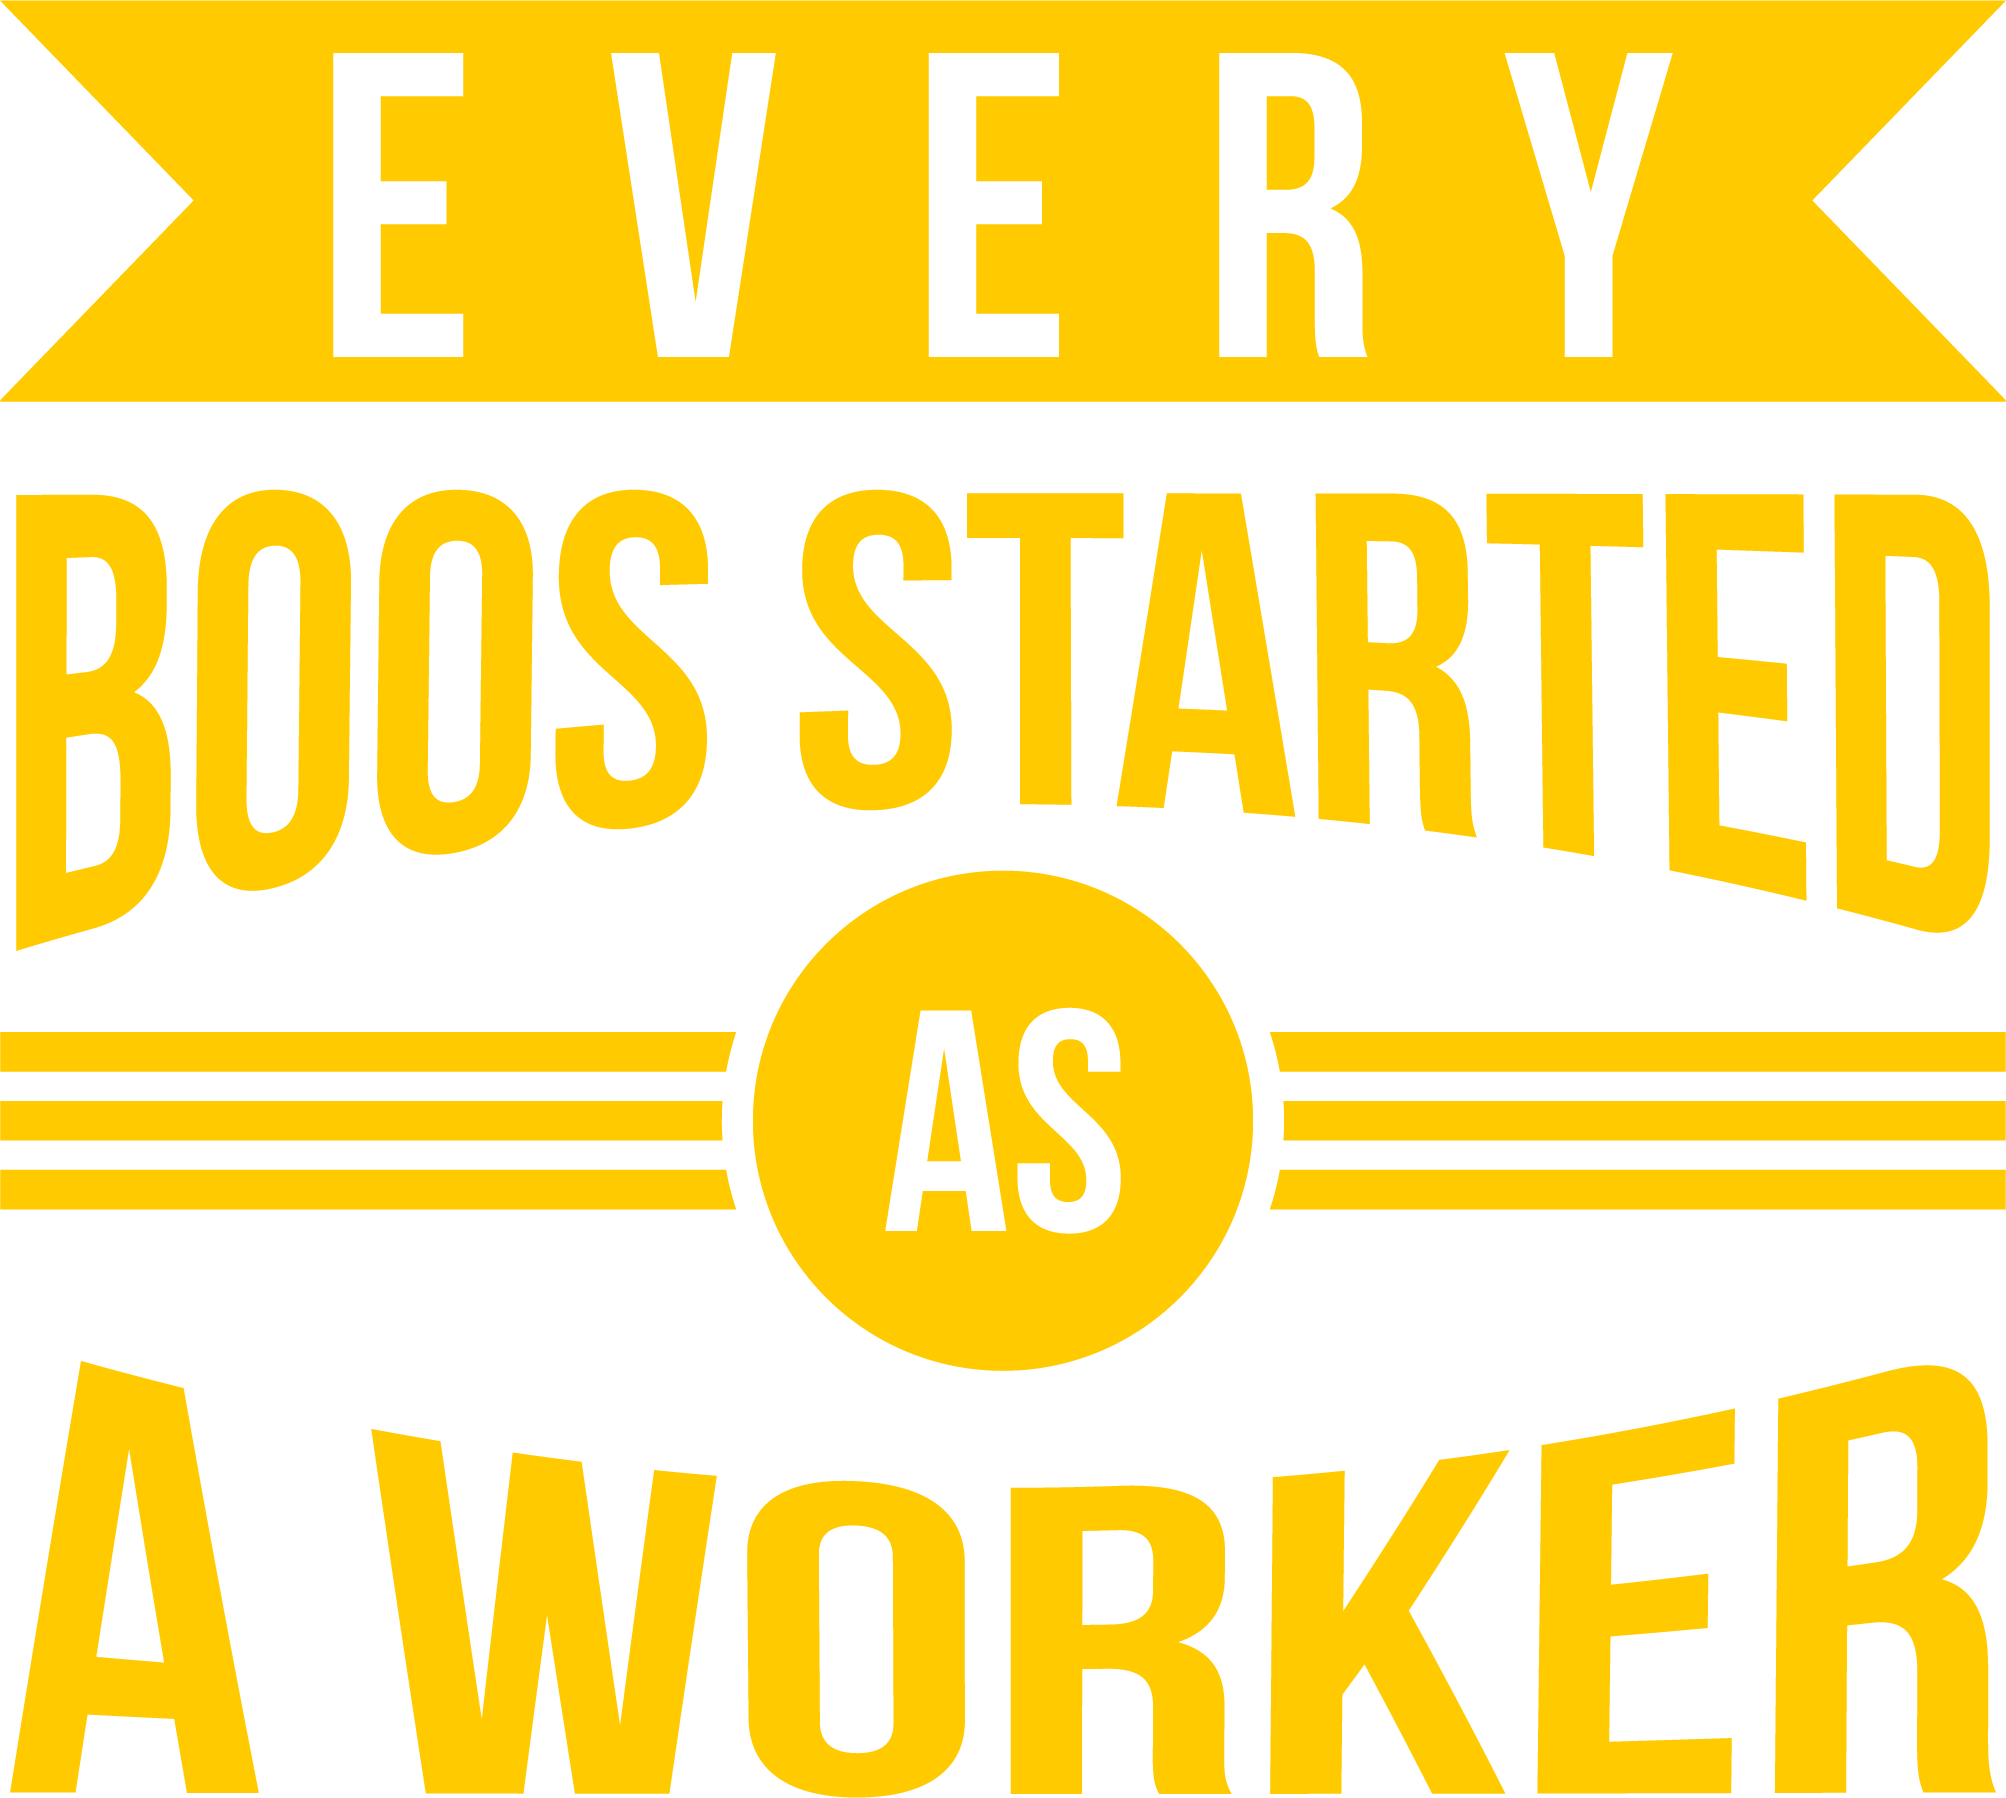 every boss started as a worker tshirt design 628